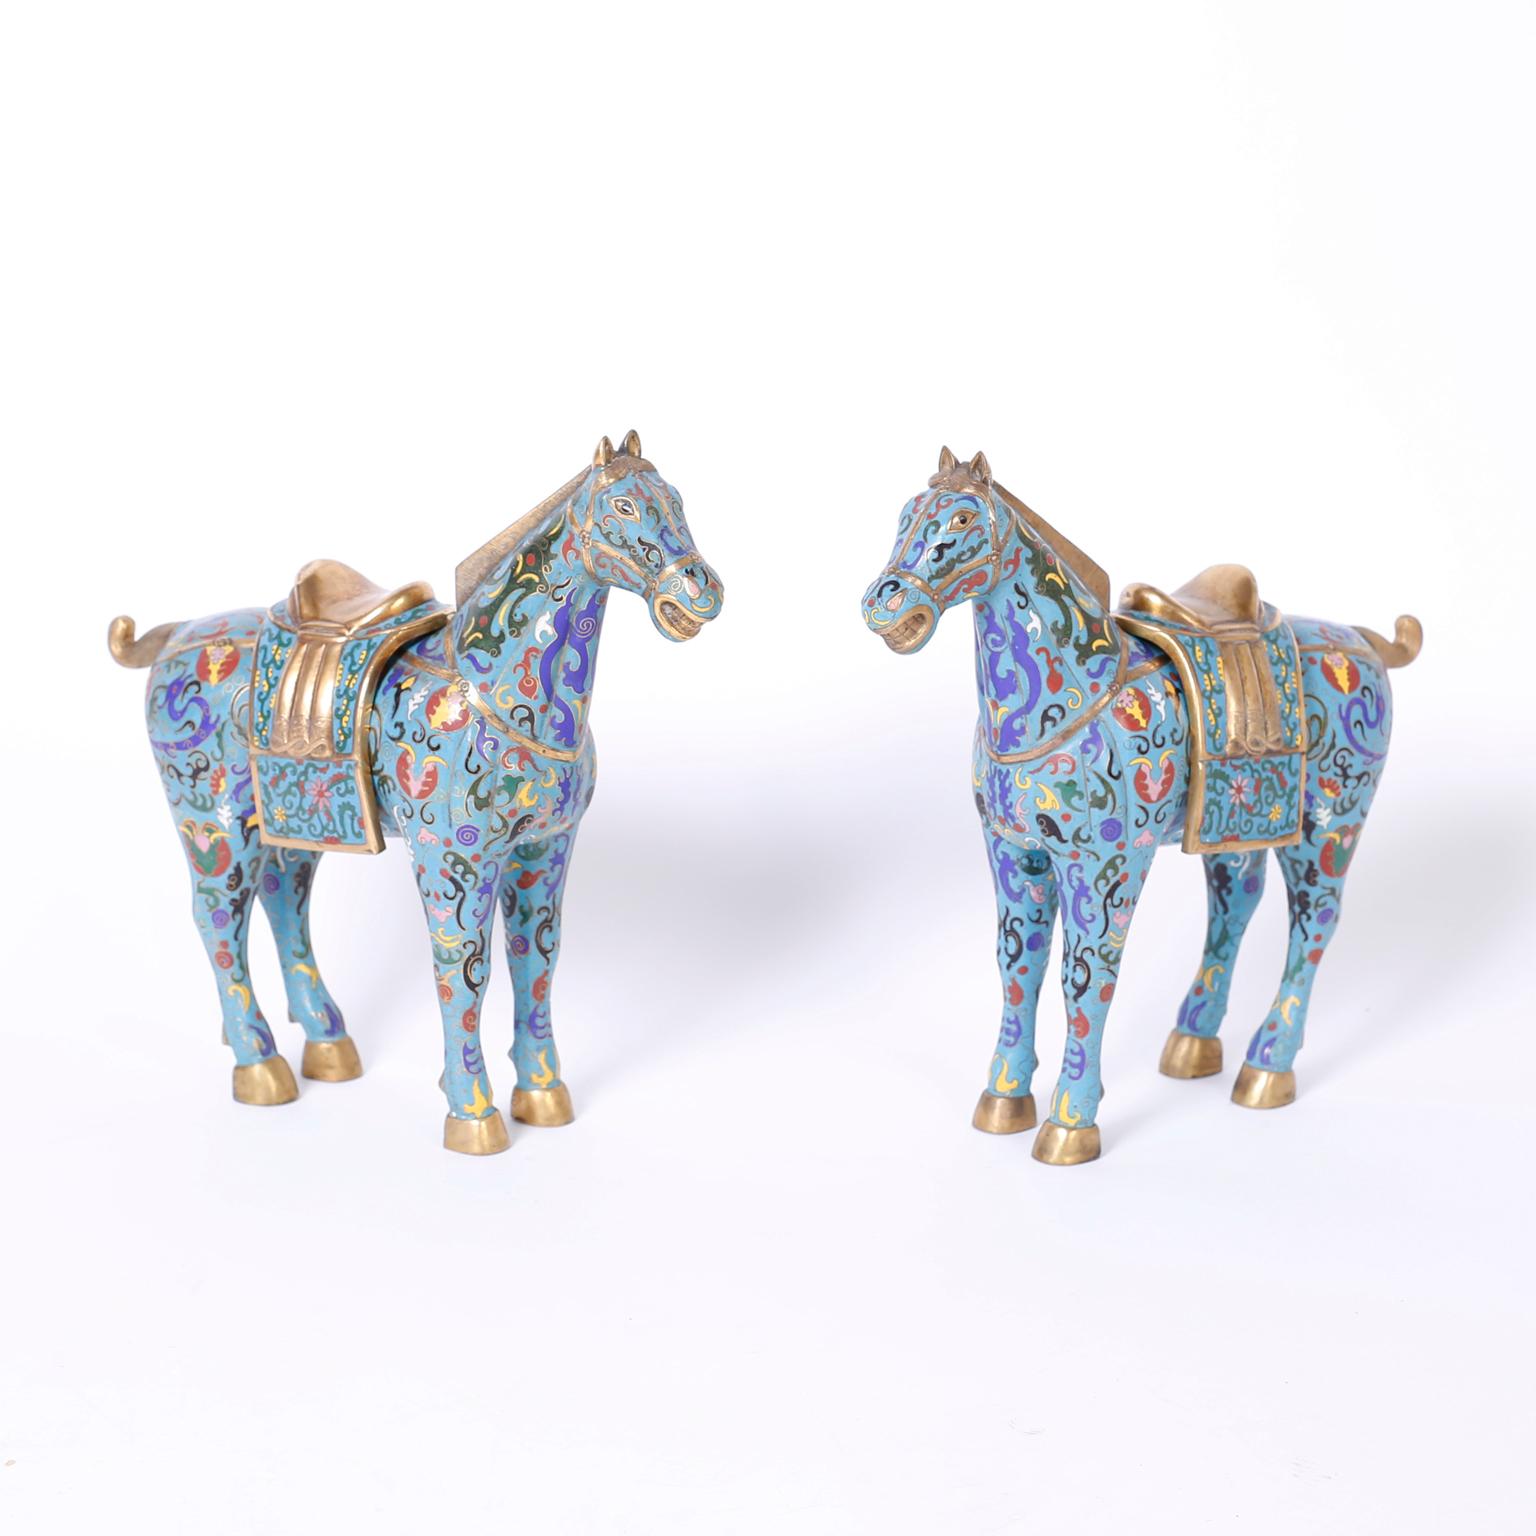 Impressive pair of Chinese cloisonné or enamel on brass horses with removable saddles and decorated from head to hoof with ancient symbolic symbols over a blue background.